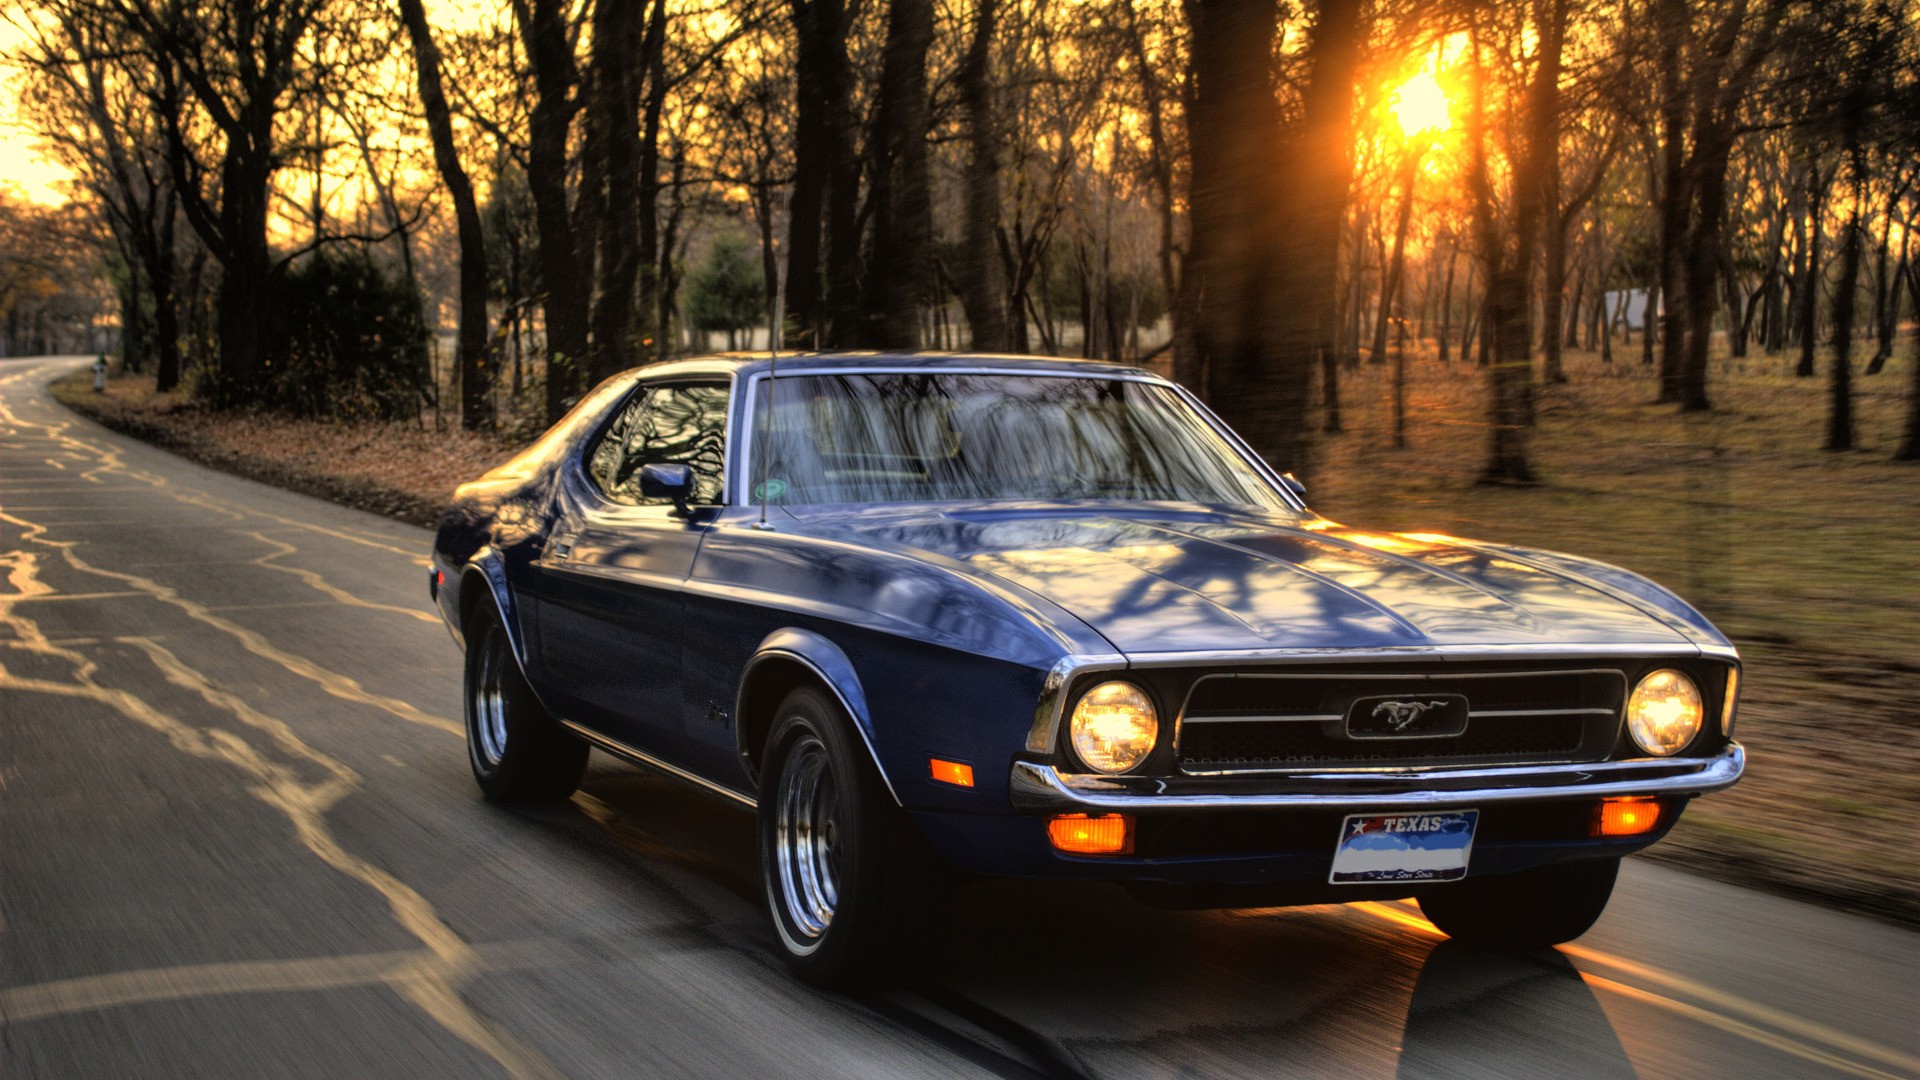 car, Ford, Ford Mustang, Sunset, Trees, Road, Muscle Cars Wallpapers HD